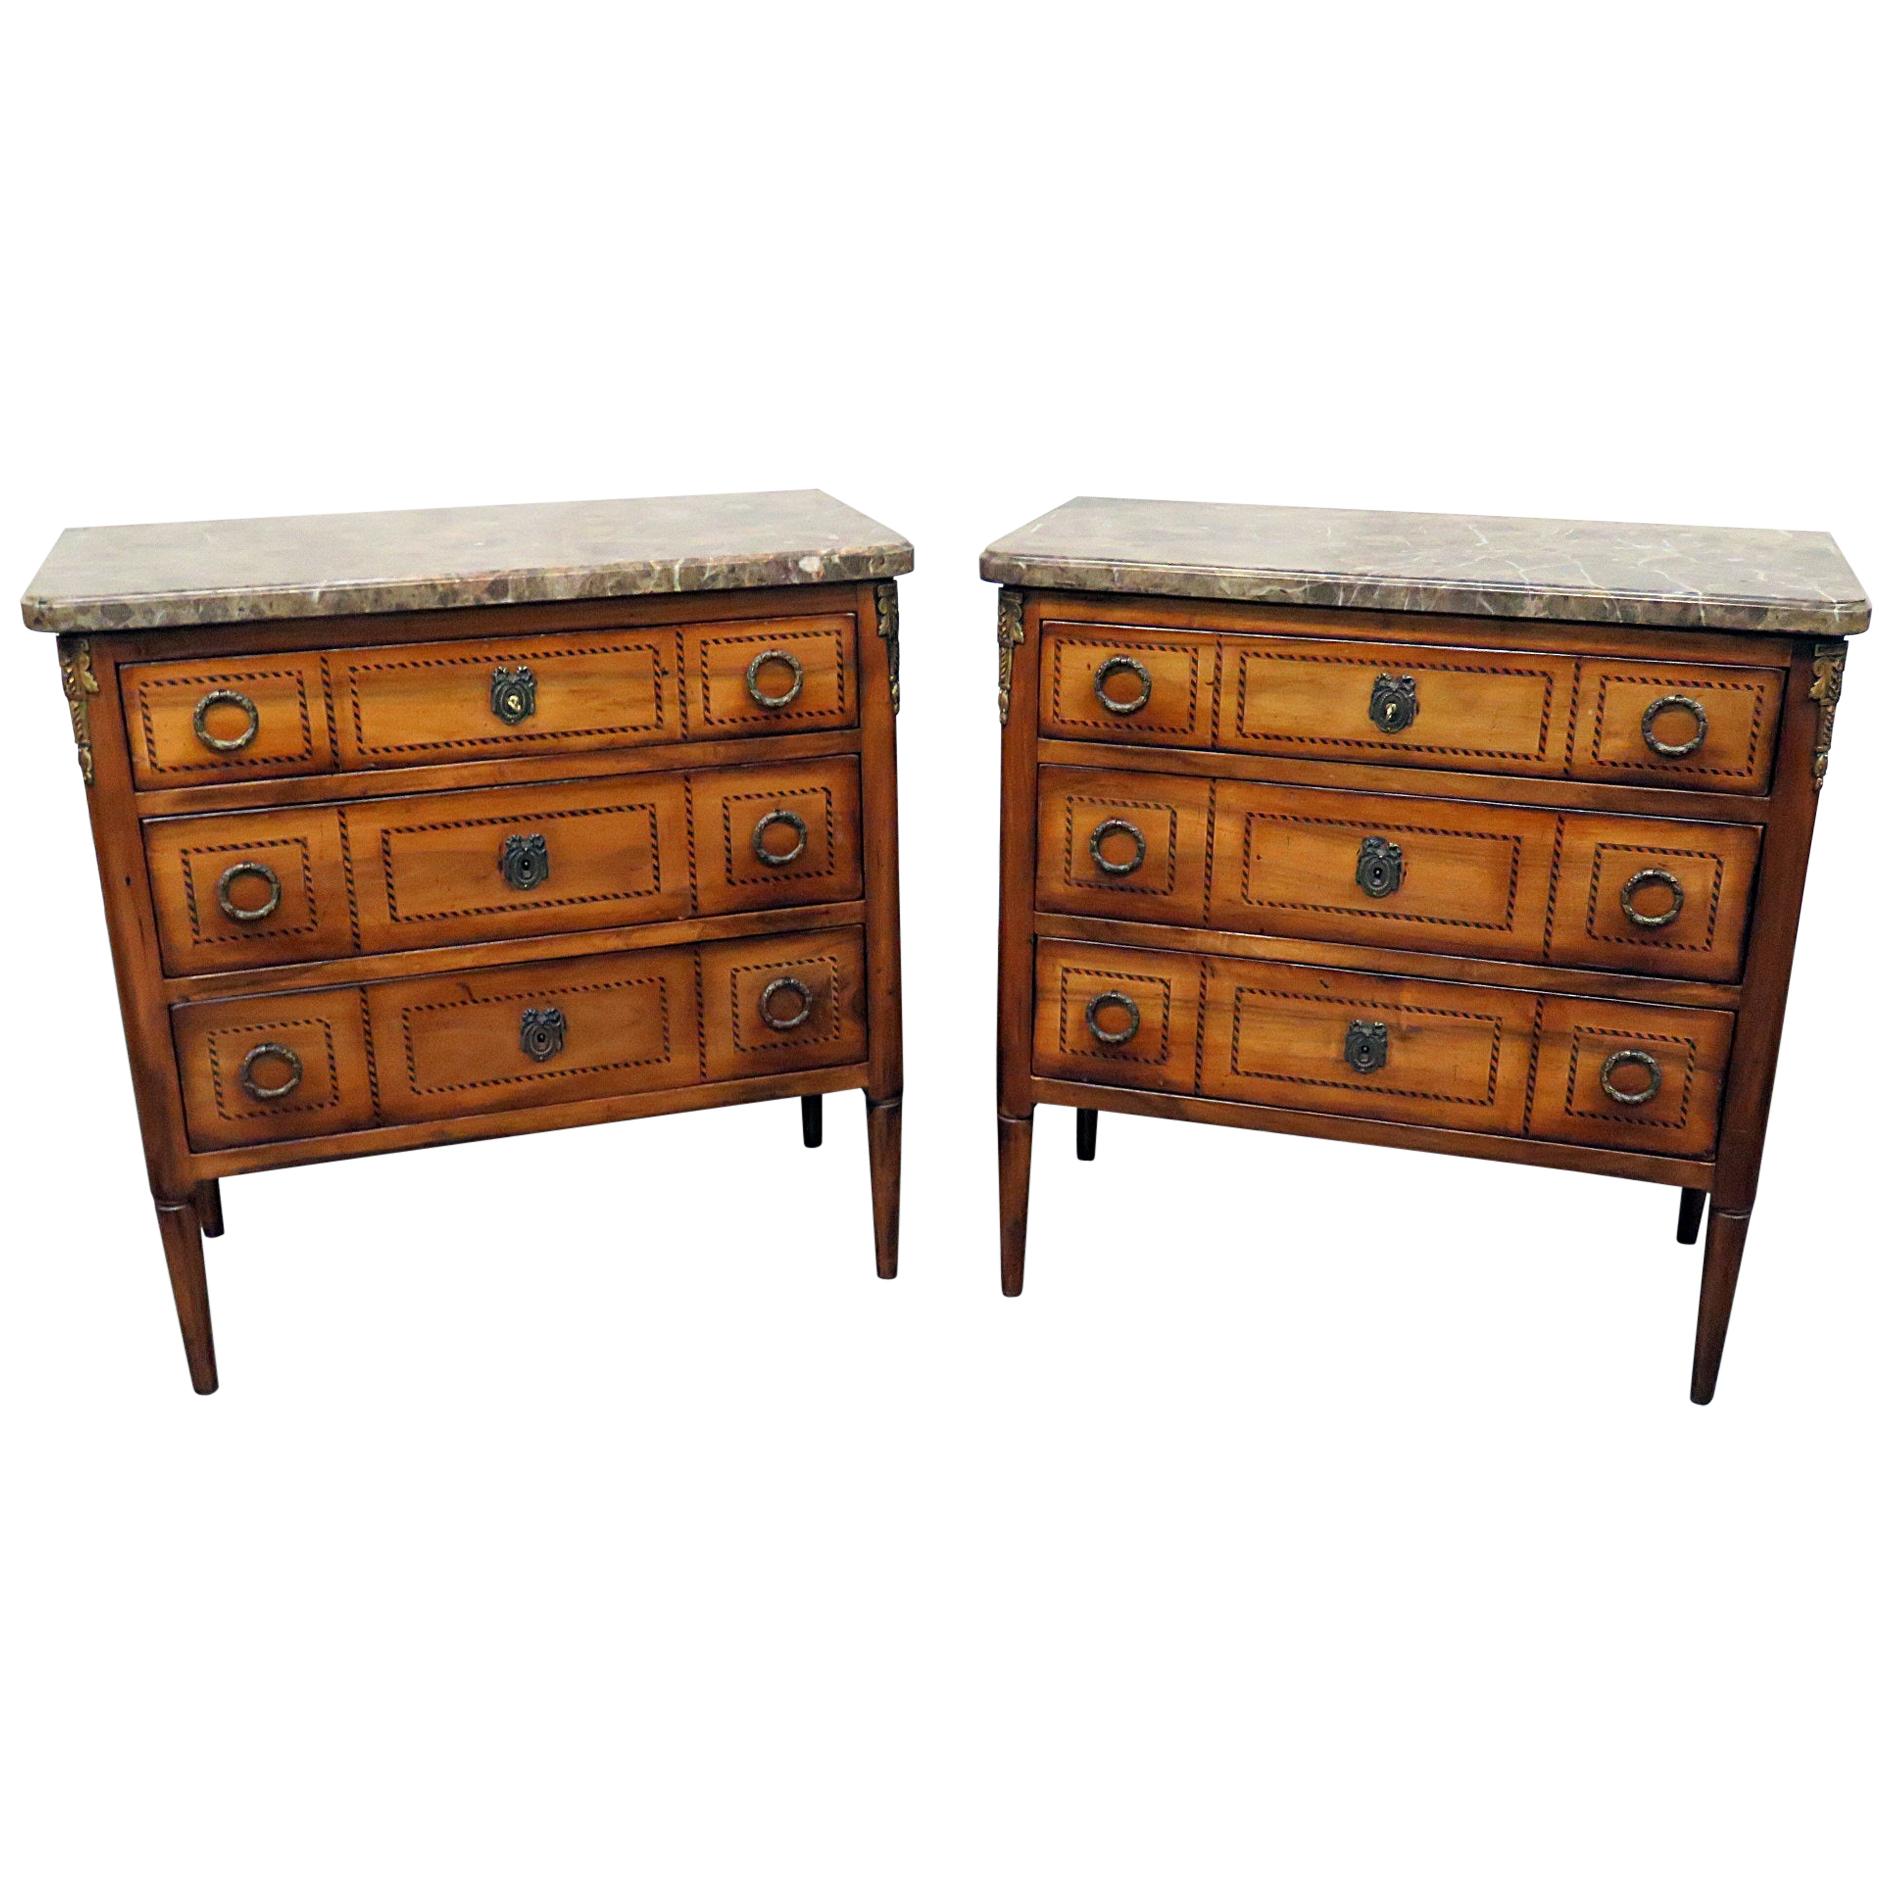 Pair of French Louis XVI Style Marble-Top Commodes Night Stands